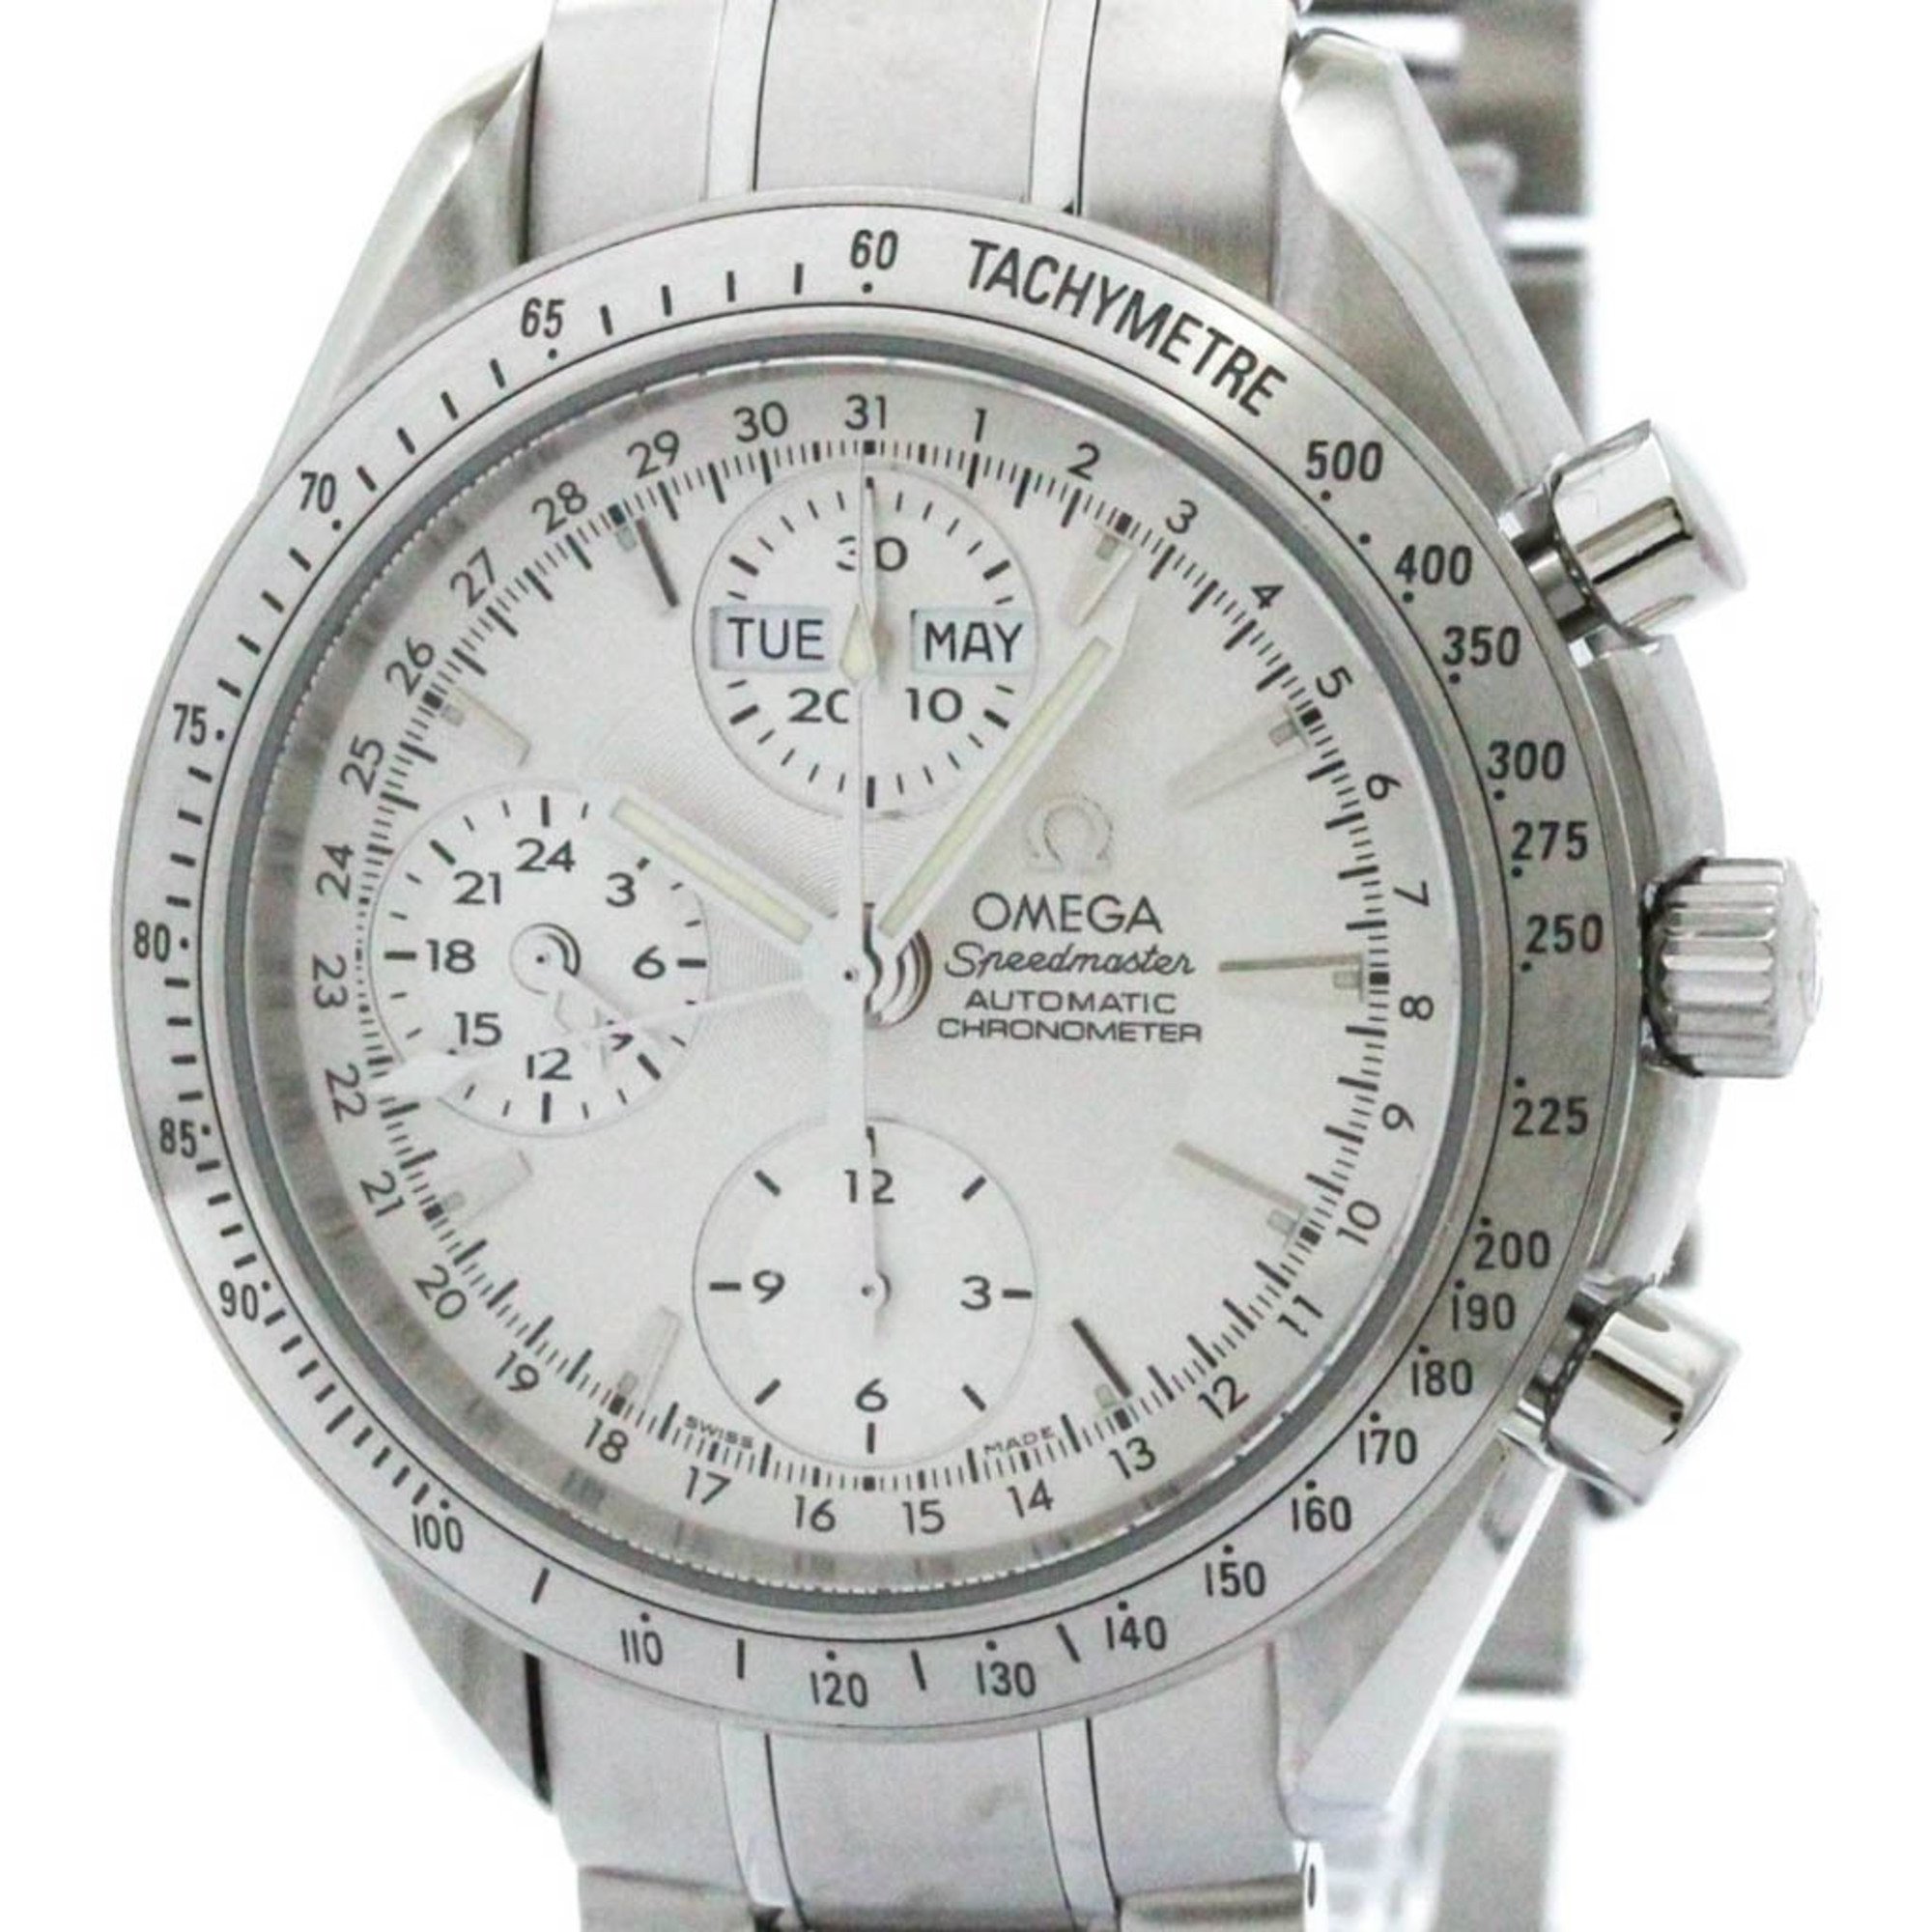 Polished OMEGA Speedmaster Day Date Steel Automatic Mens Watch 3221.30 BF571762